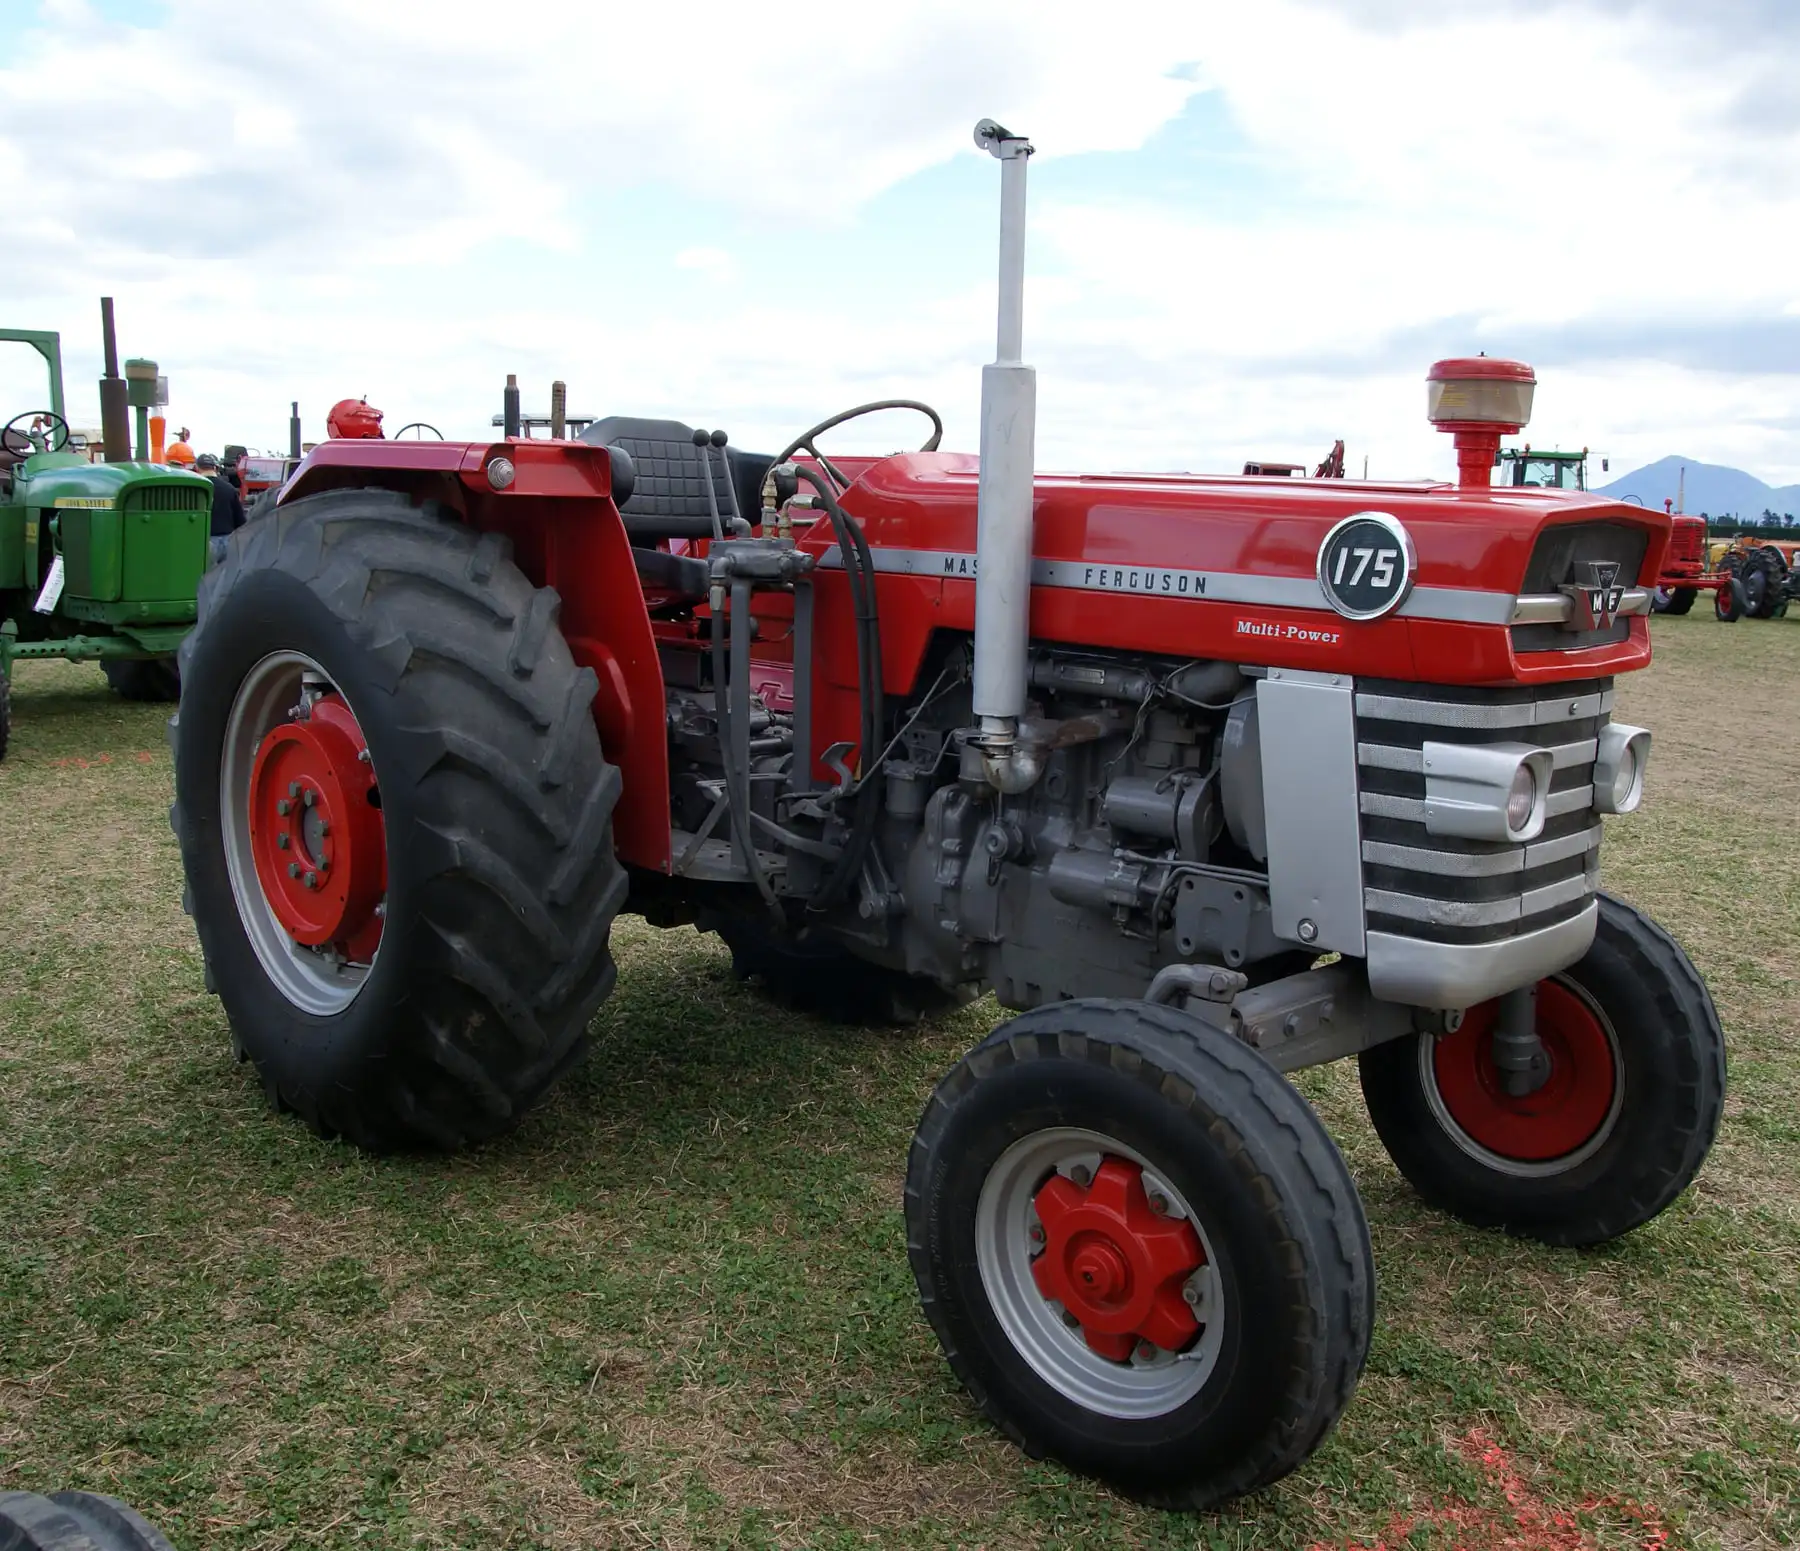 Ultimate Capacity And Performance All Massey Ferguson Compact Tractor Models Buy Used Massey 6629